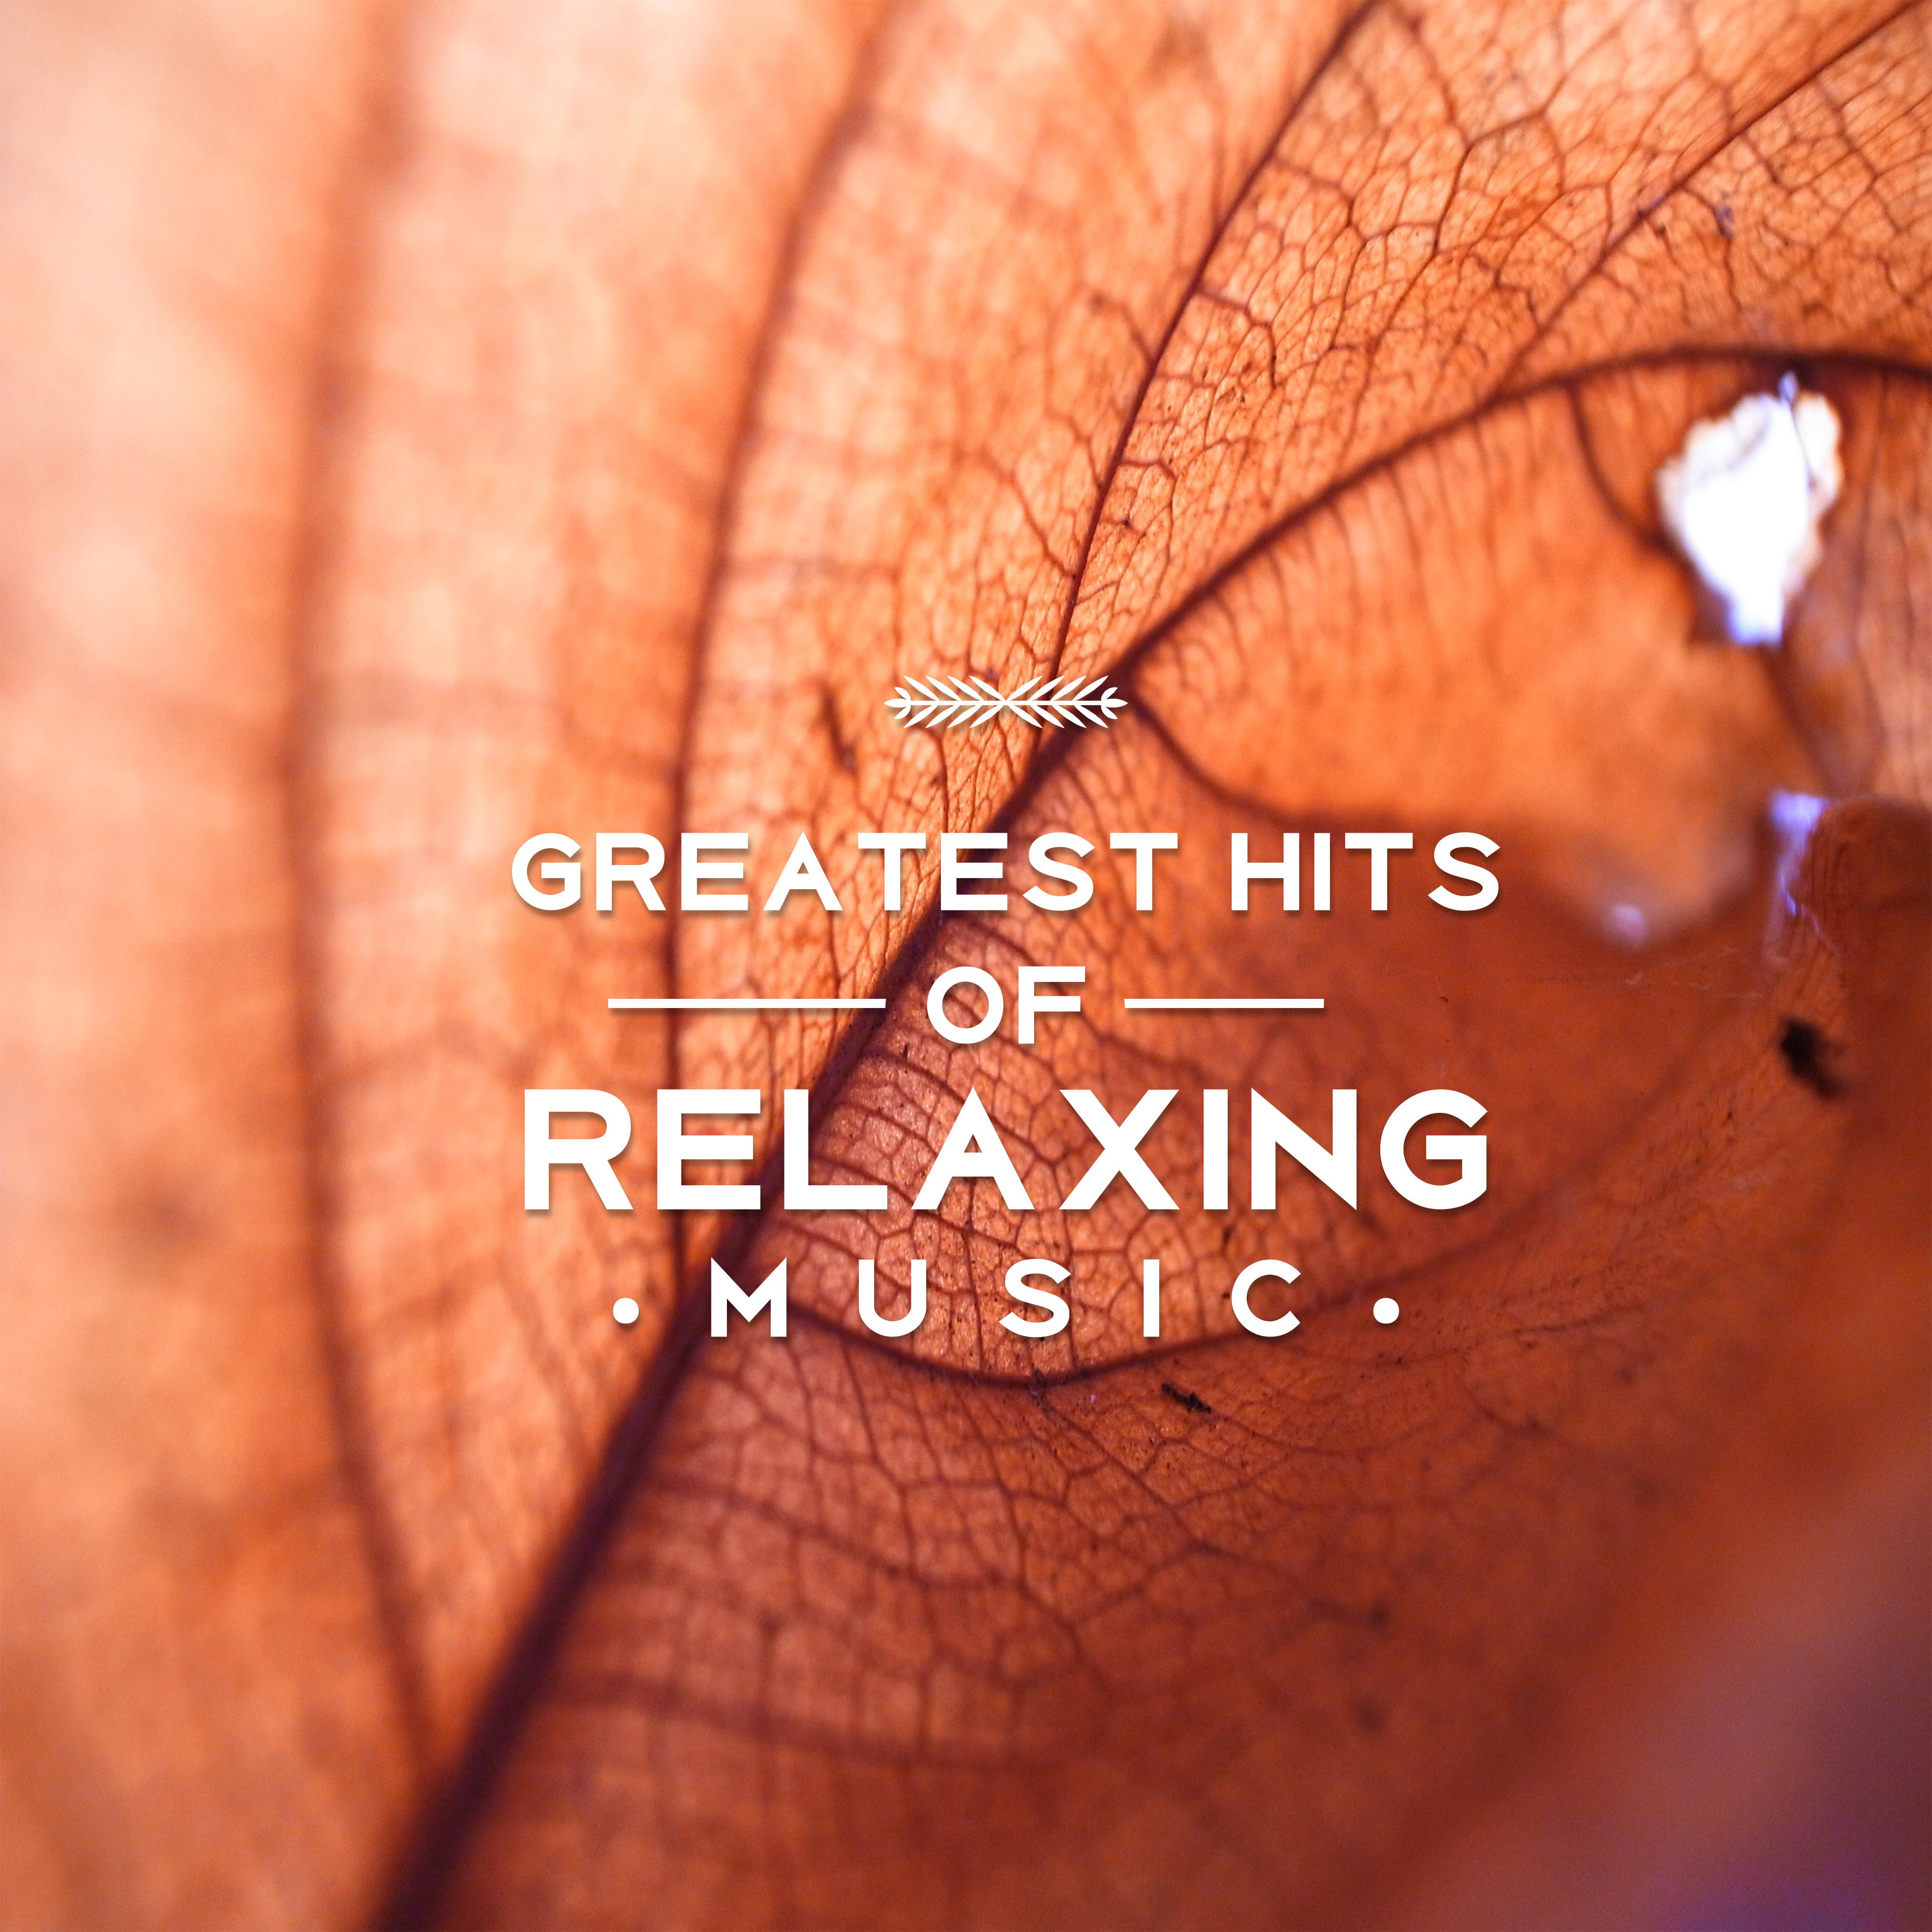 Greatest Hits of Relaxing Music  Deep Relaxation, New Age, Calming Sounds of Nature, Rest, Music Therapy